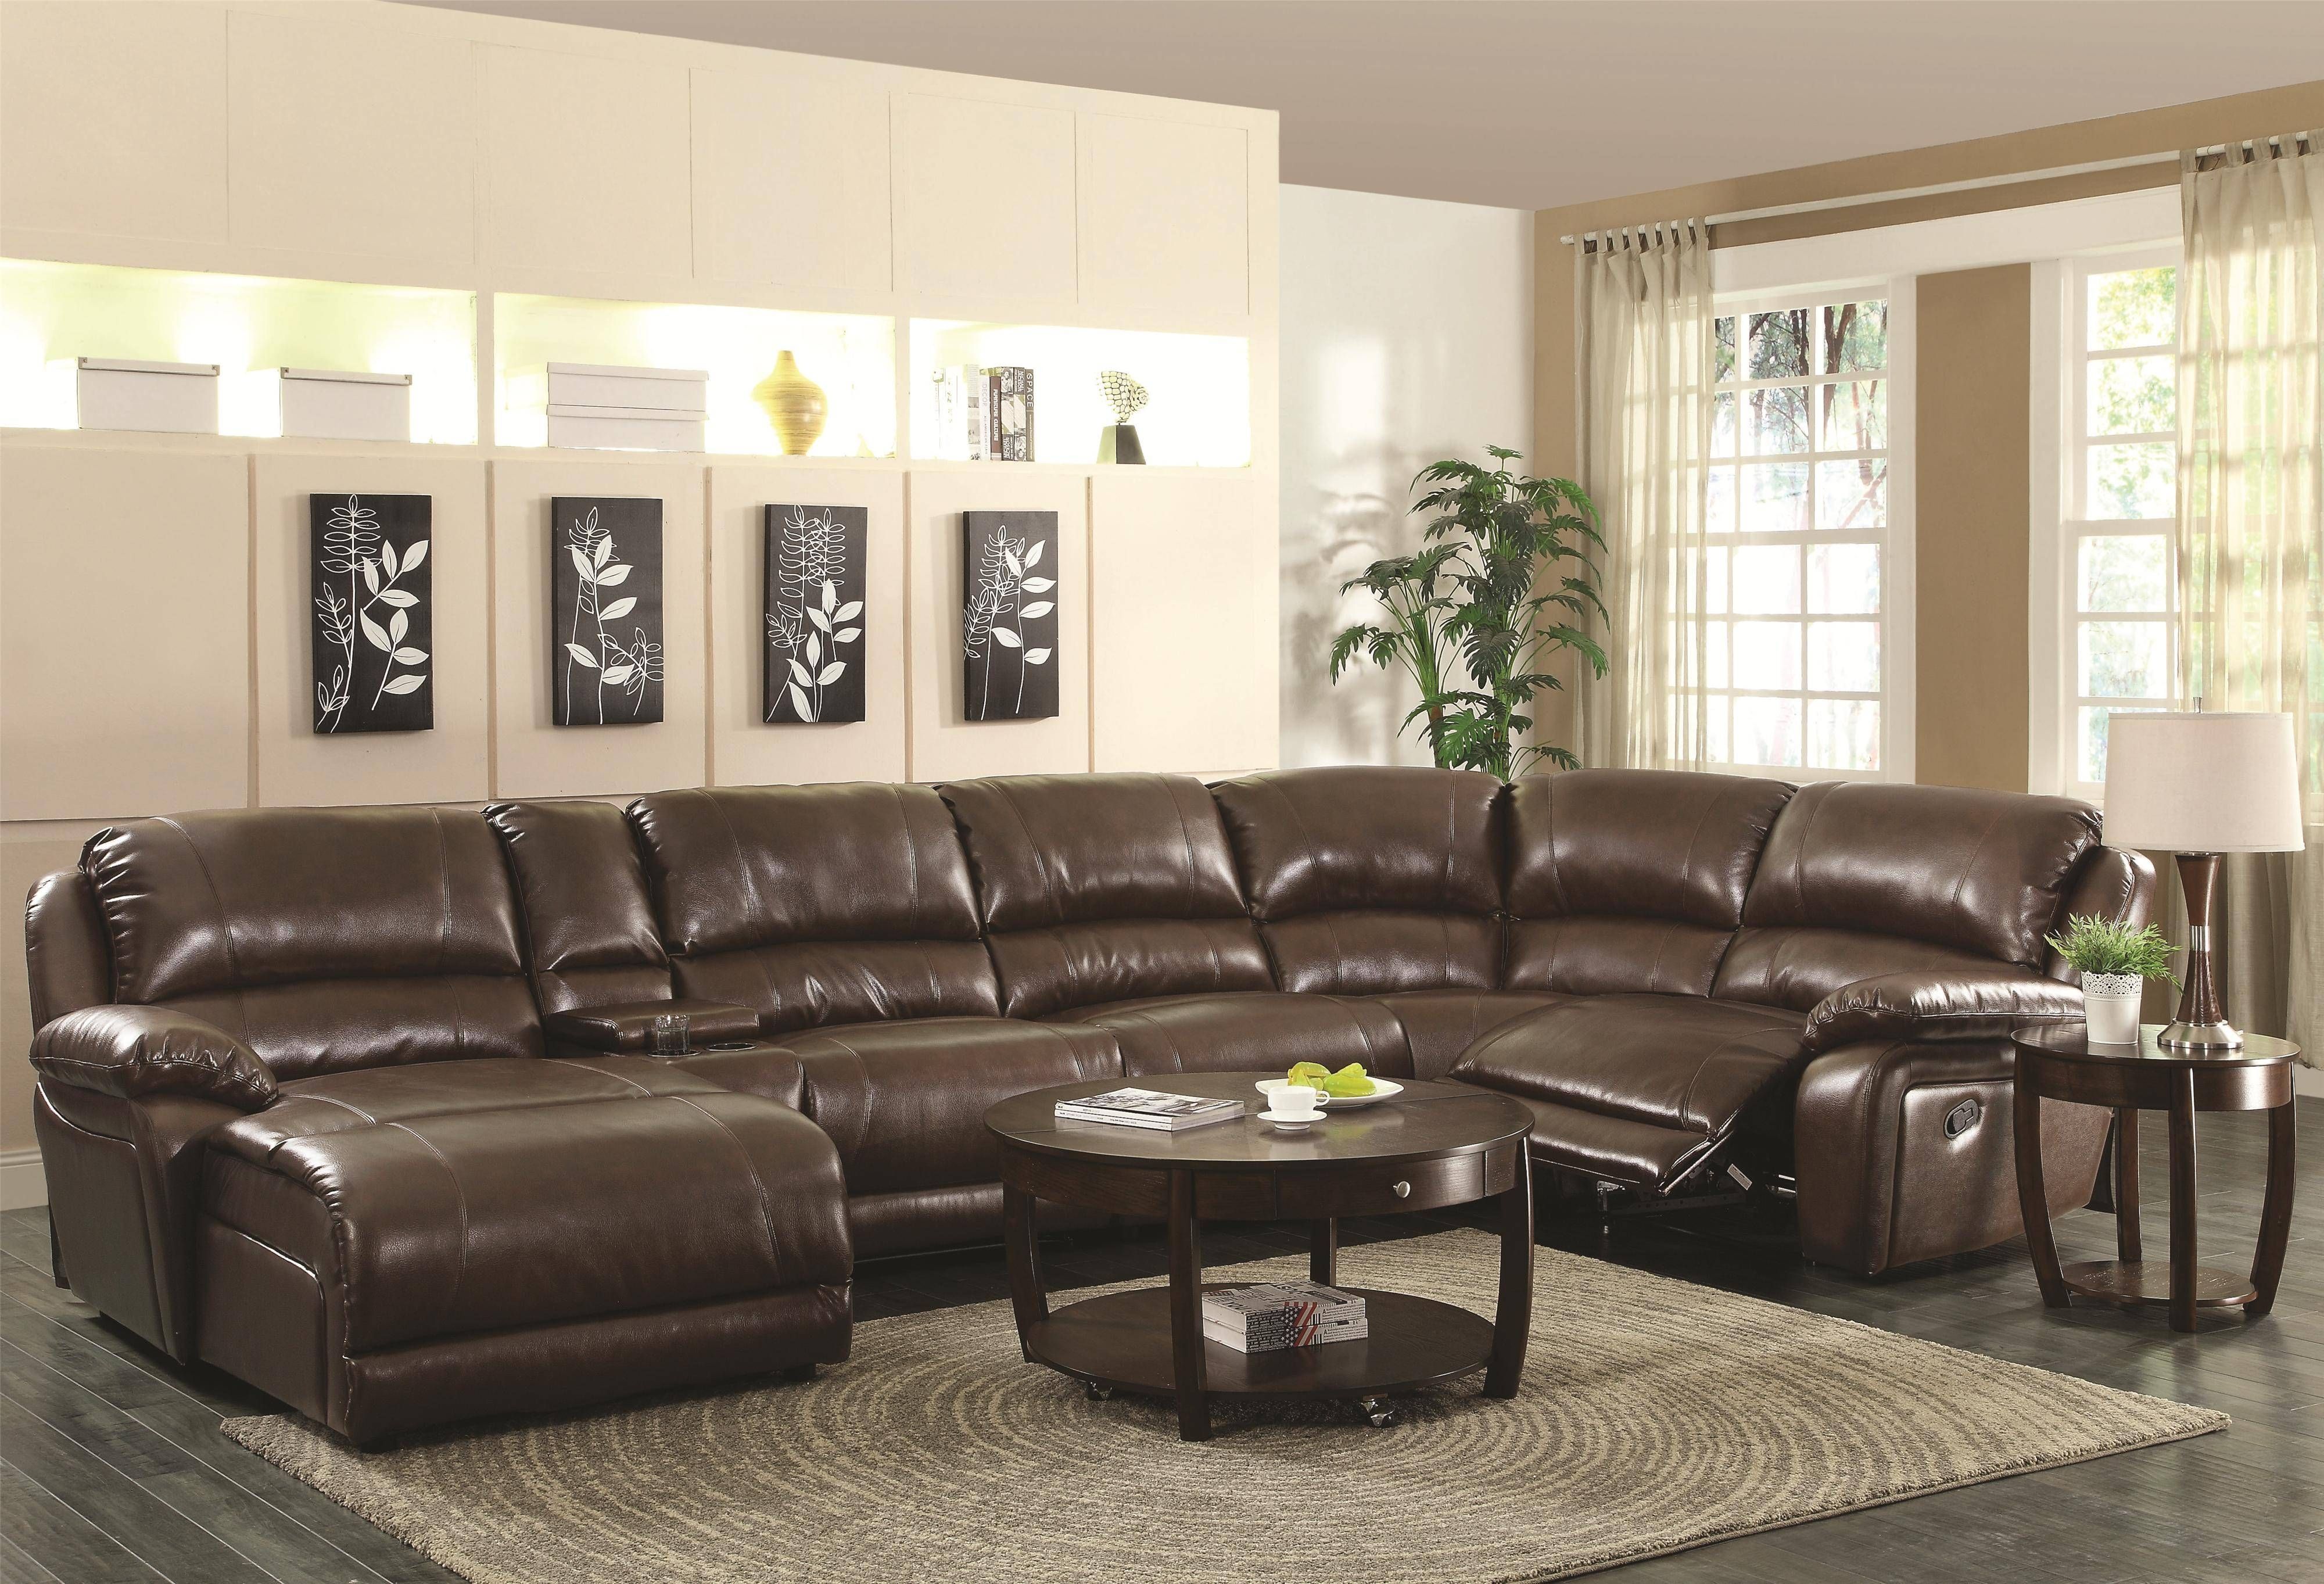 Coaster Mackenzie Chestnut 6 Piece Reclining Sectional Sofa With For Motion Sectional Sofas (View 13 of 30)